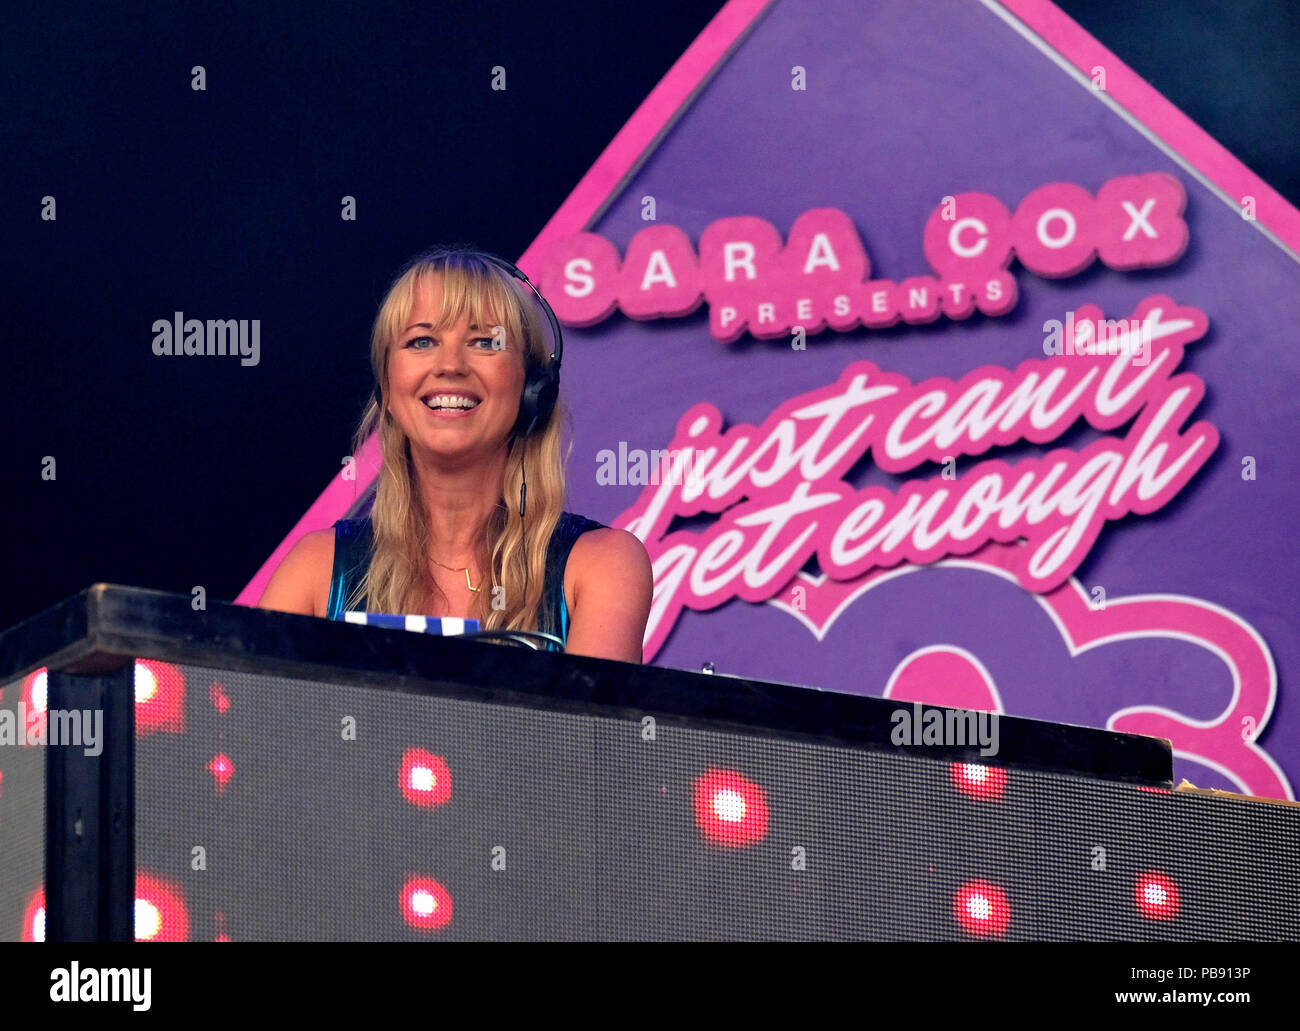 Camp Bestival Festival Day 1 -  July 27th 2018.  Sara Cox  Presents Just Can't Get Enough 80s, performing on stage, Lulworth, Dorset, UK Stock Photo